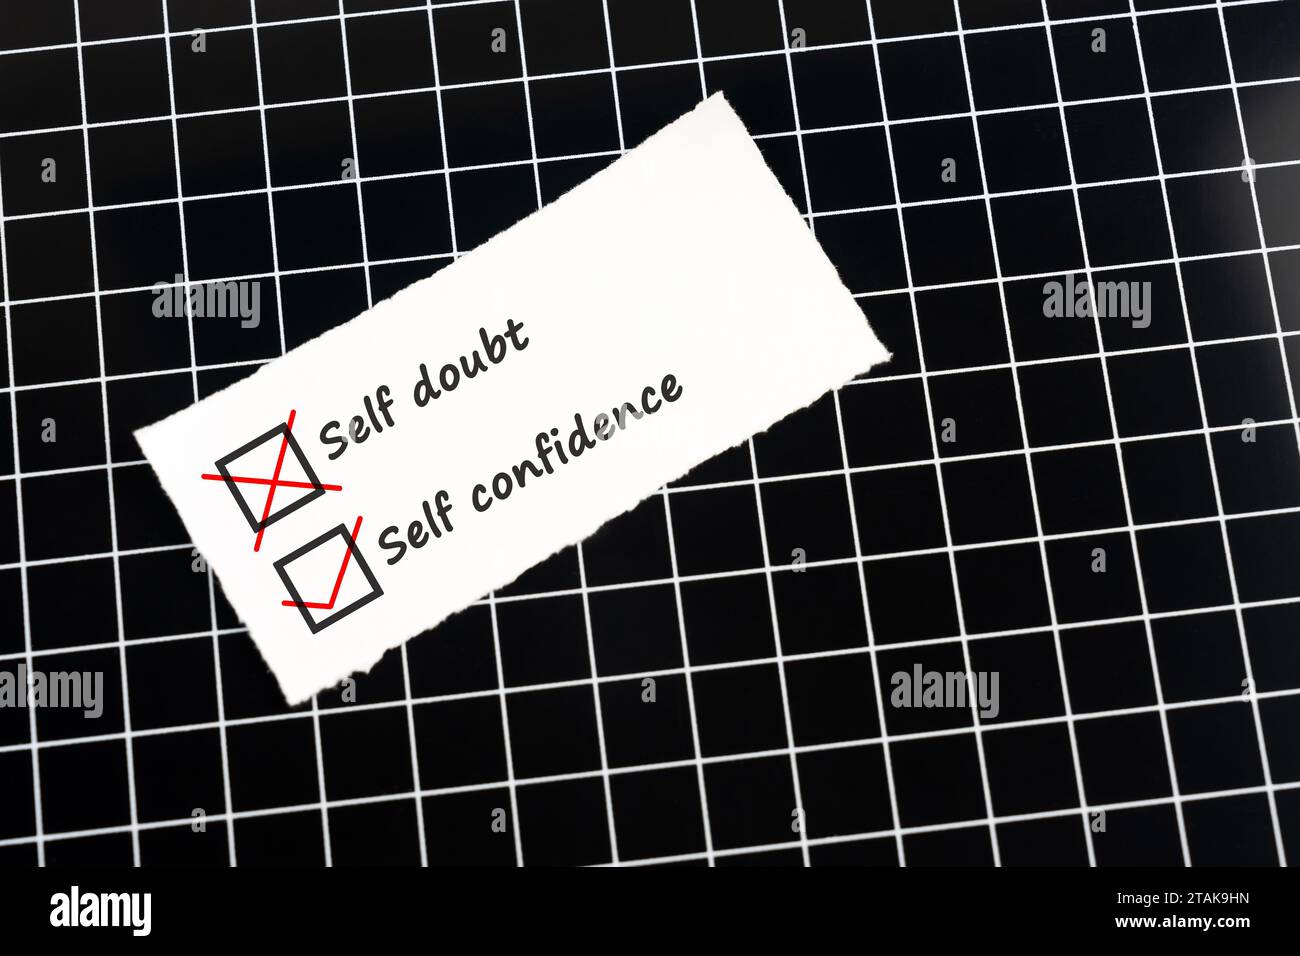 Self Doubt and Self Confidence text on paper Stock Photo